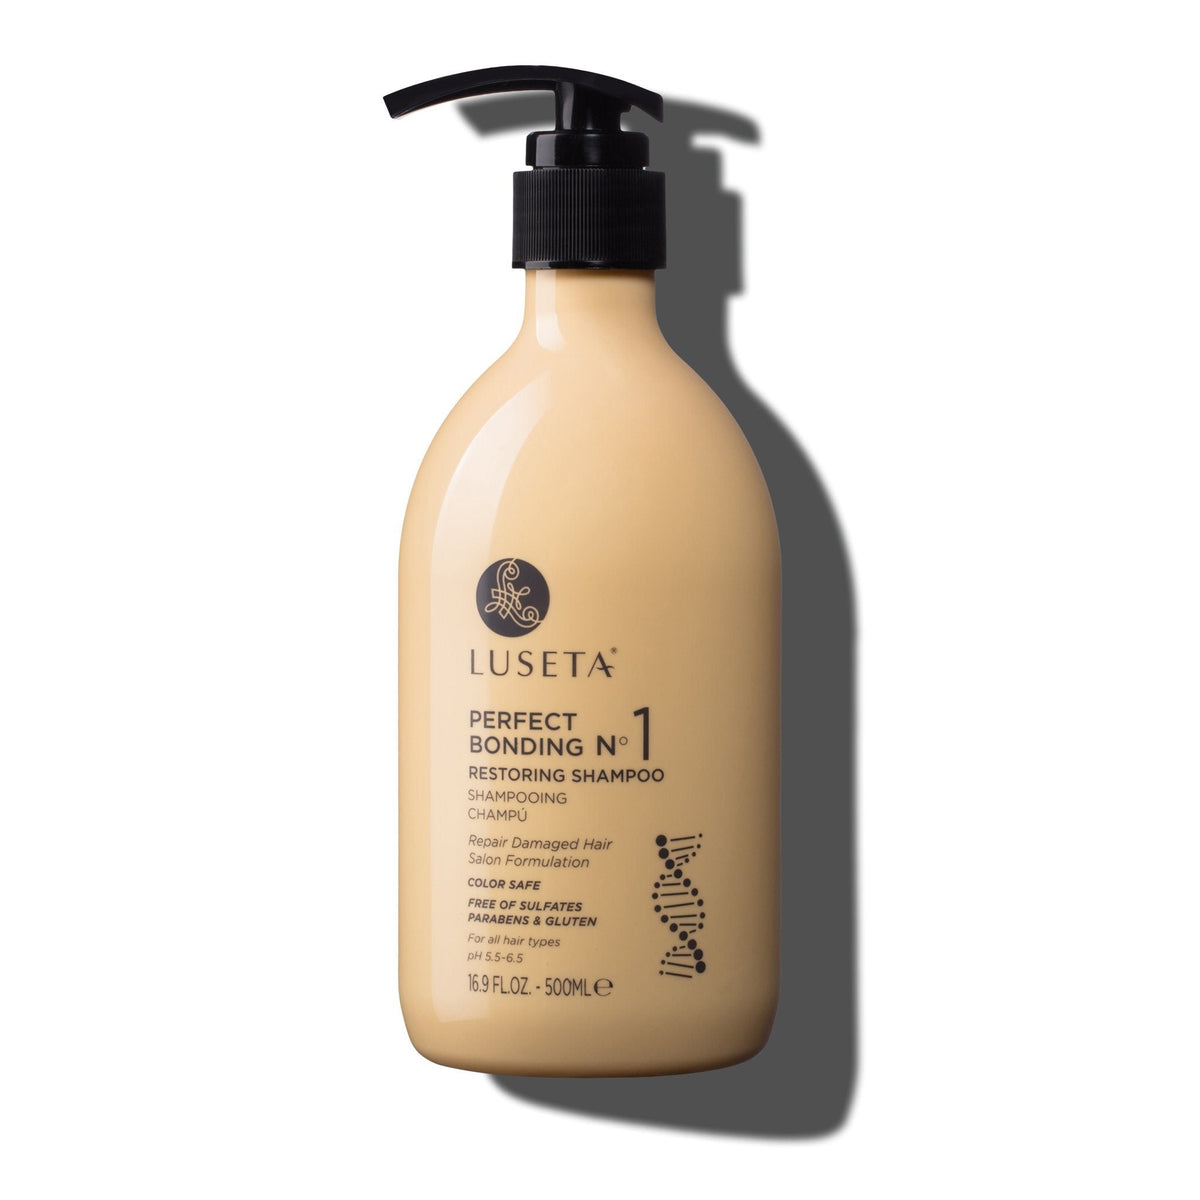 Perfect Bonding Restoring Shampoo - 16.9oz - by Luseta Beauty |ProCare Outlet|